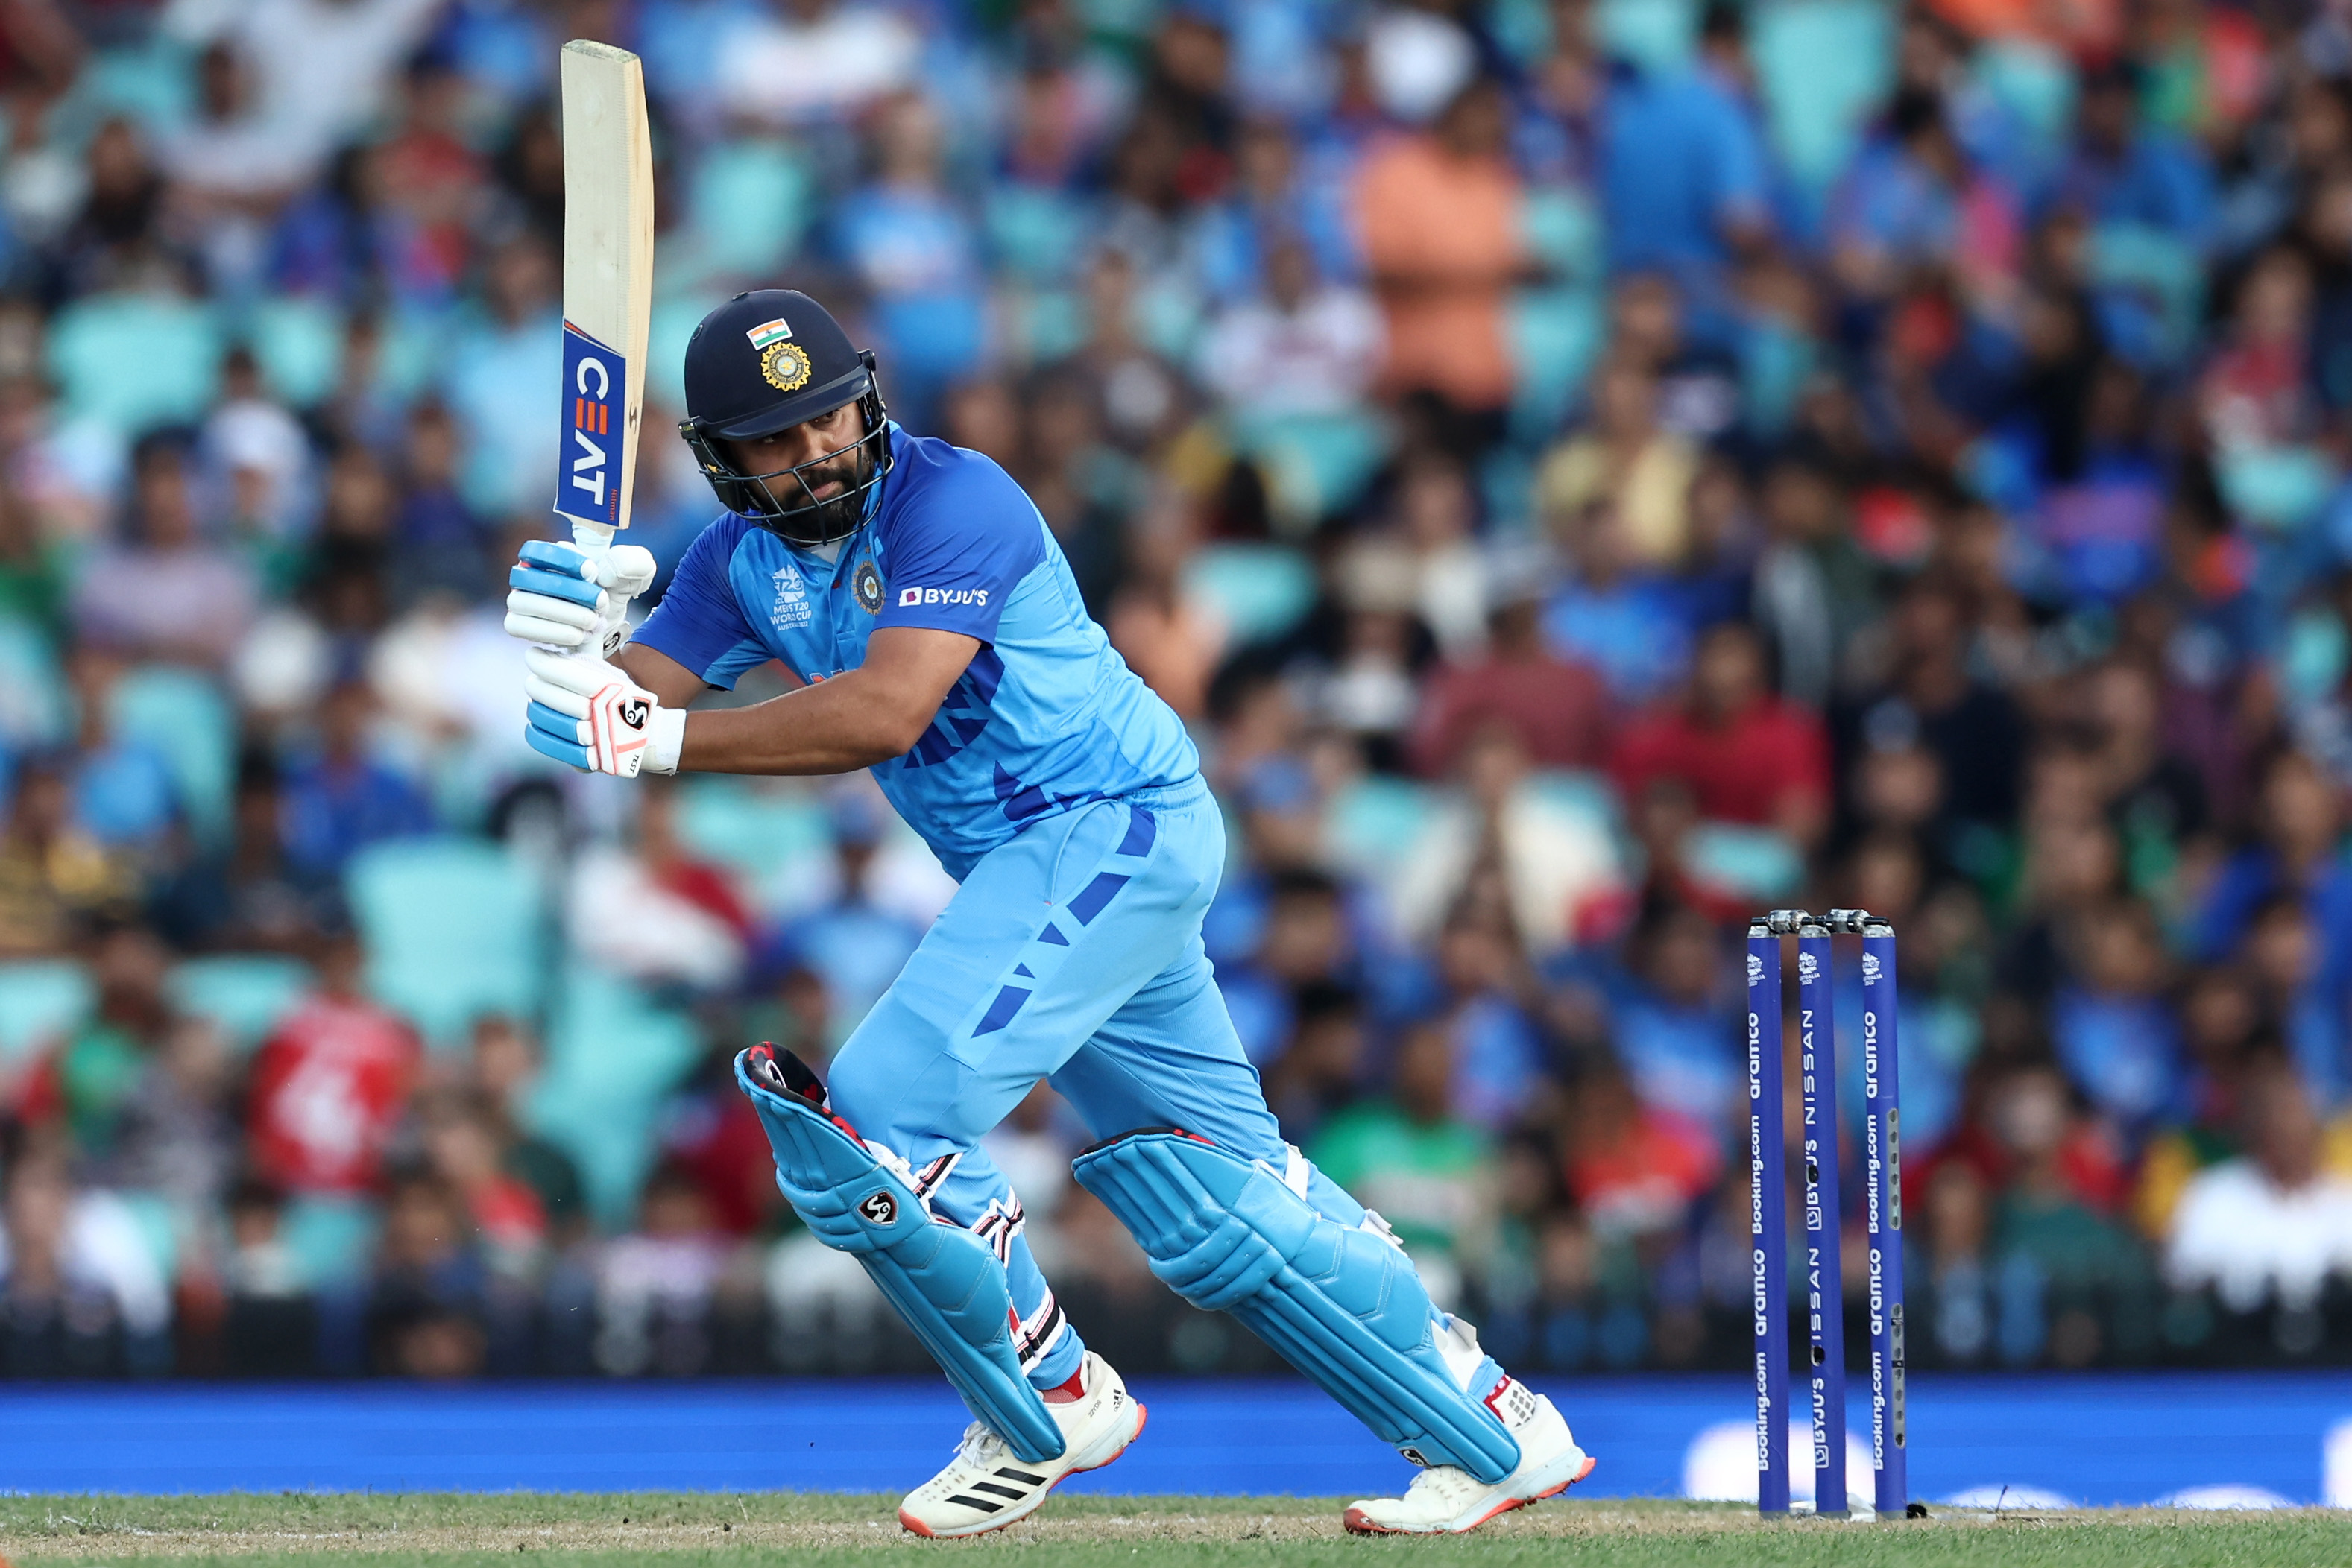 Most Sixes T20 WC: Rohit Sharma surpasses Yuvraj Singh for MOST sixes in T20 World Cups by an Indian, only West Indies legend Chris Gayle ahead of India captain - CHECK Out 